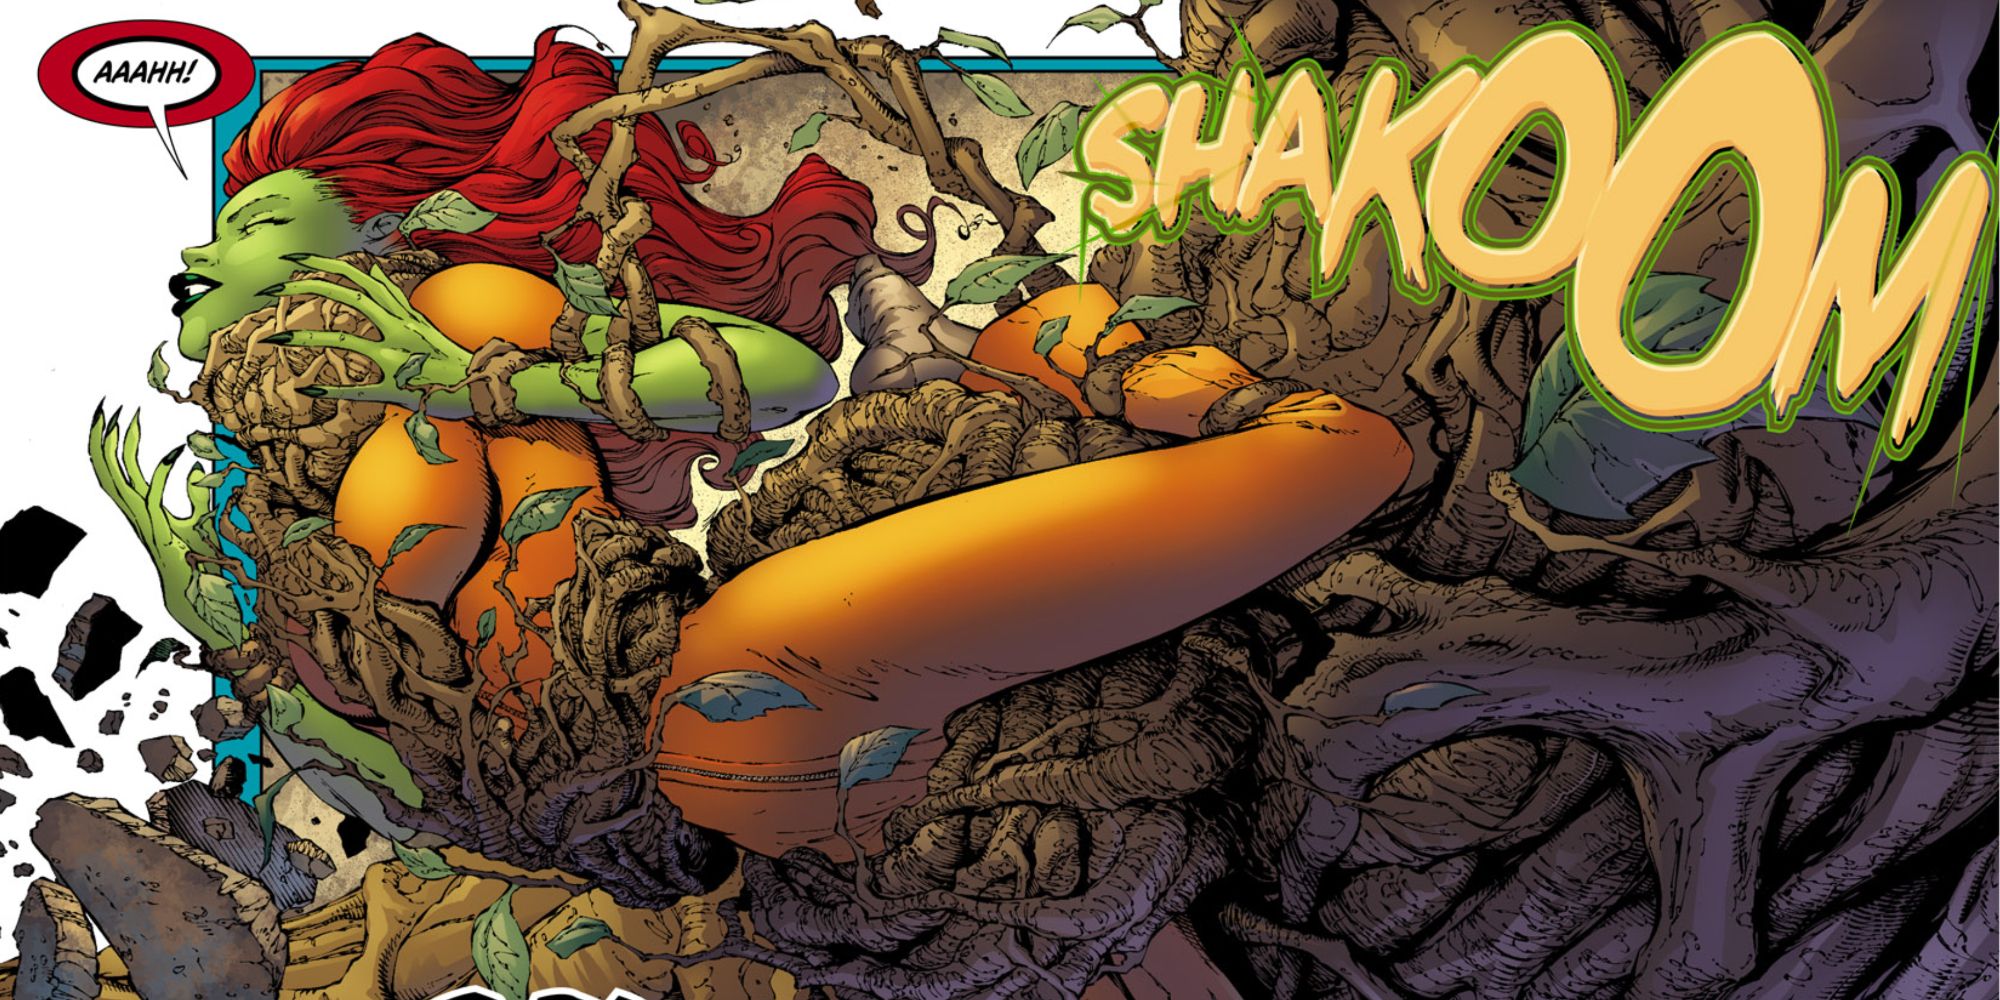 Harvest attacks Poison Ivy in DC Comics.